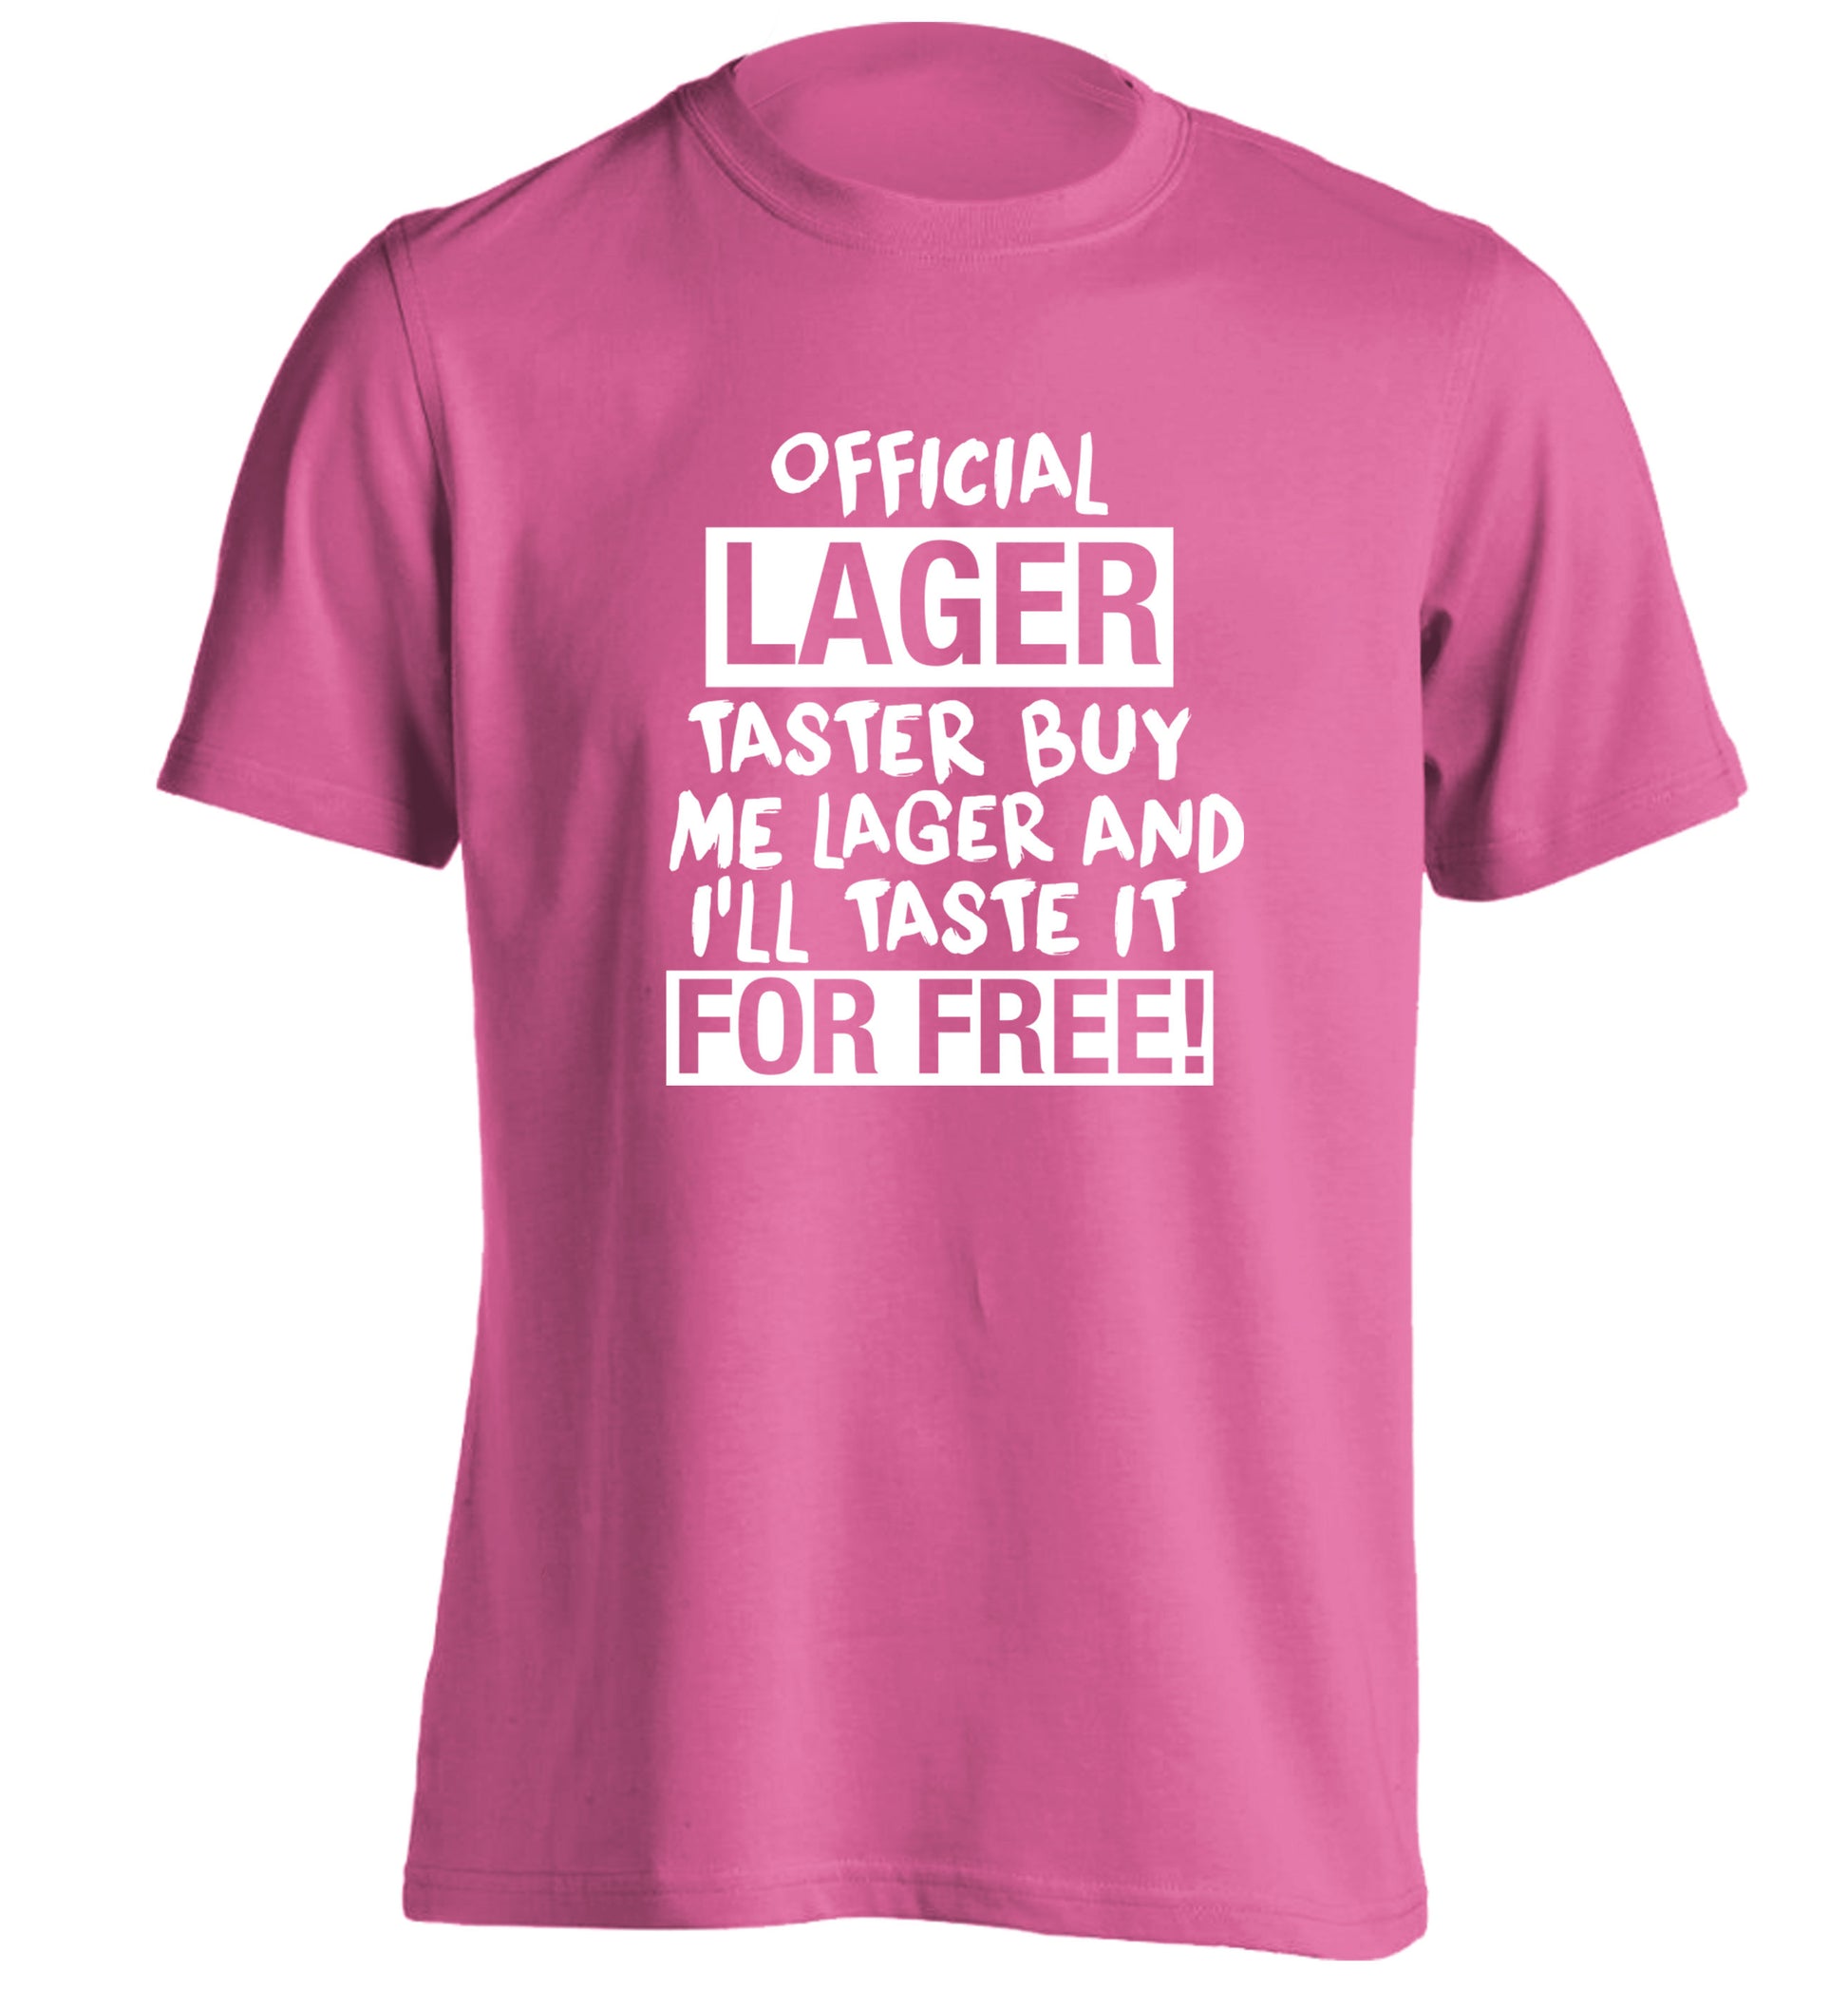 Official lager taster buy me lager and I'll taste it for free! adults unisex pink Tshirt 2XL